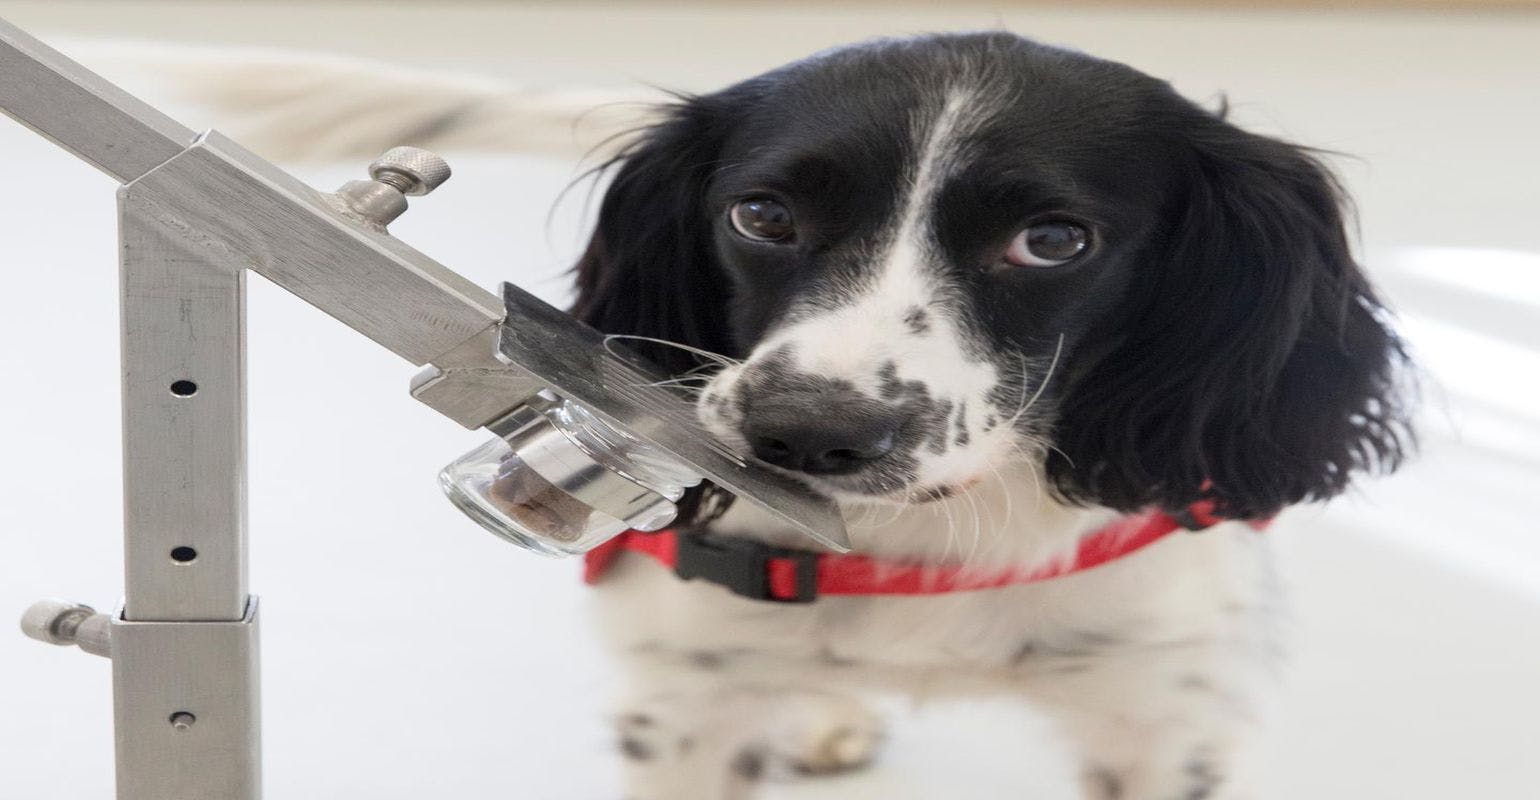 Sniffer Dogs Could Detect Malaria in People